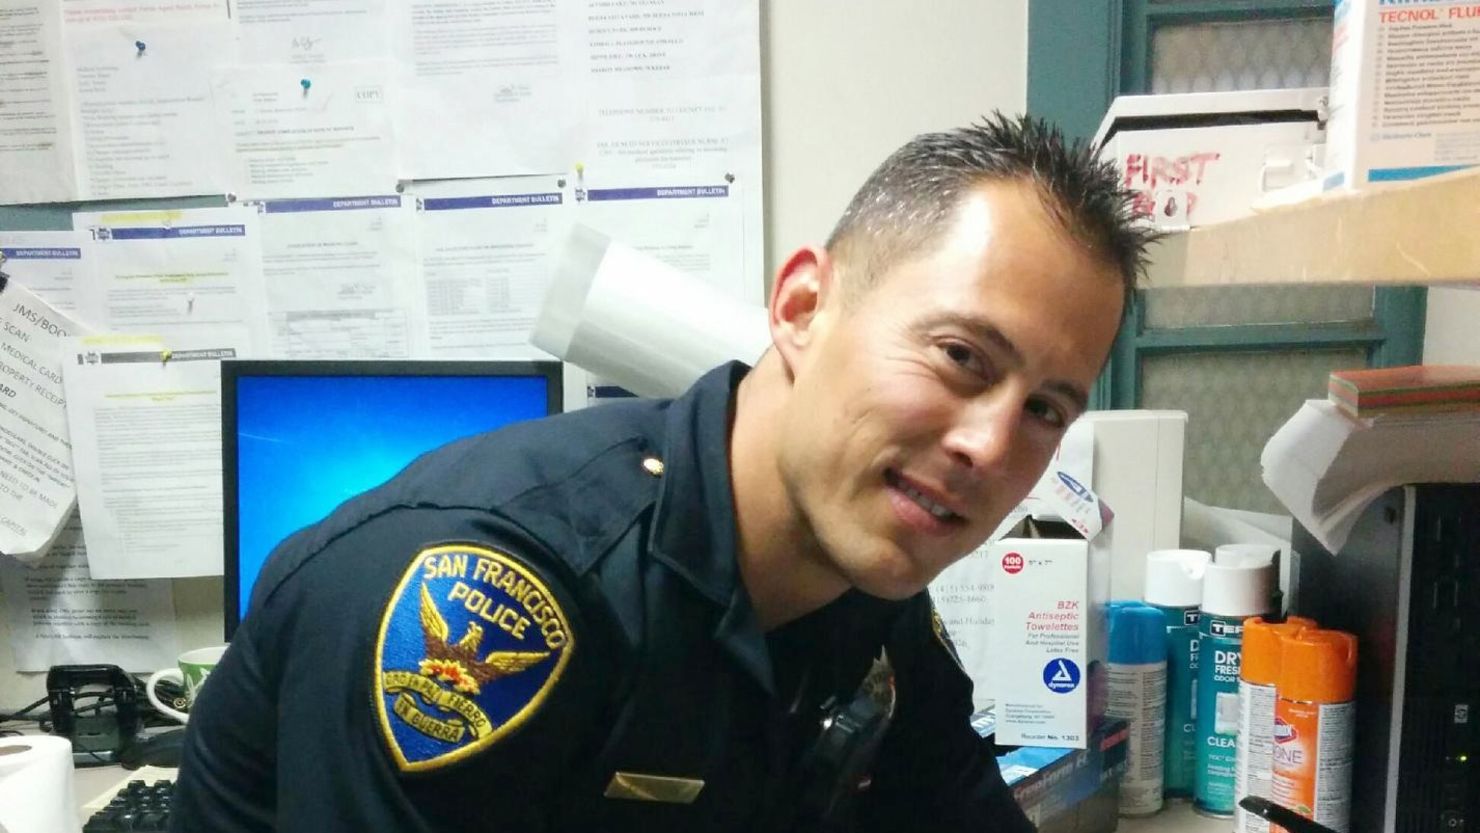 San Francisco Police Officer Chris Kohrs -- the "Hot Cop of Castro" to his fans and friends -- became a viral sensation after a stranger created a Facebook page in his honor.